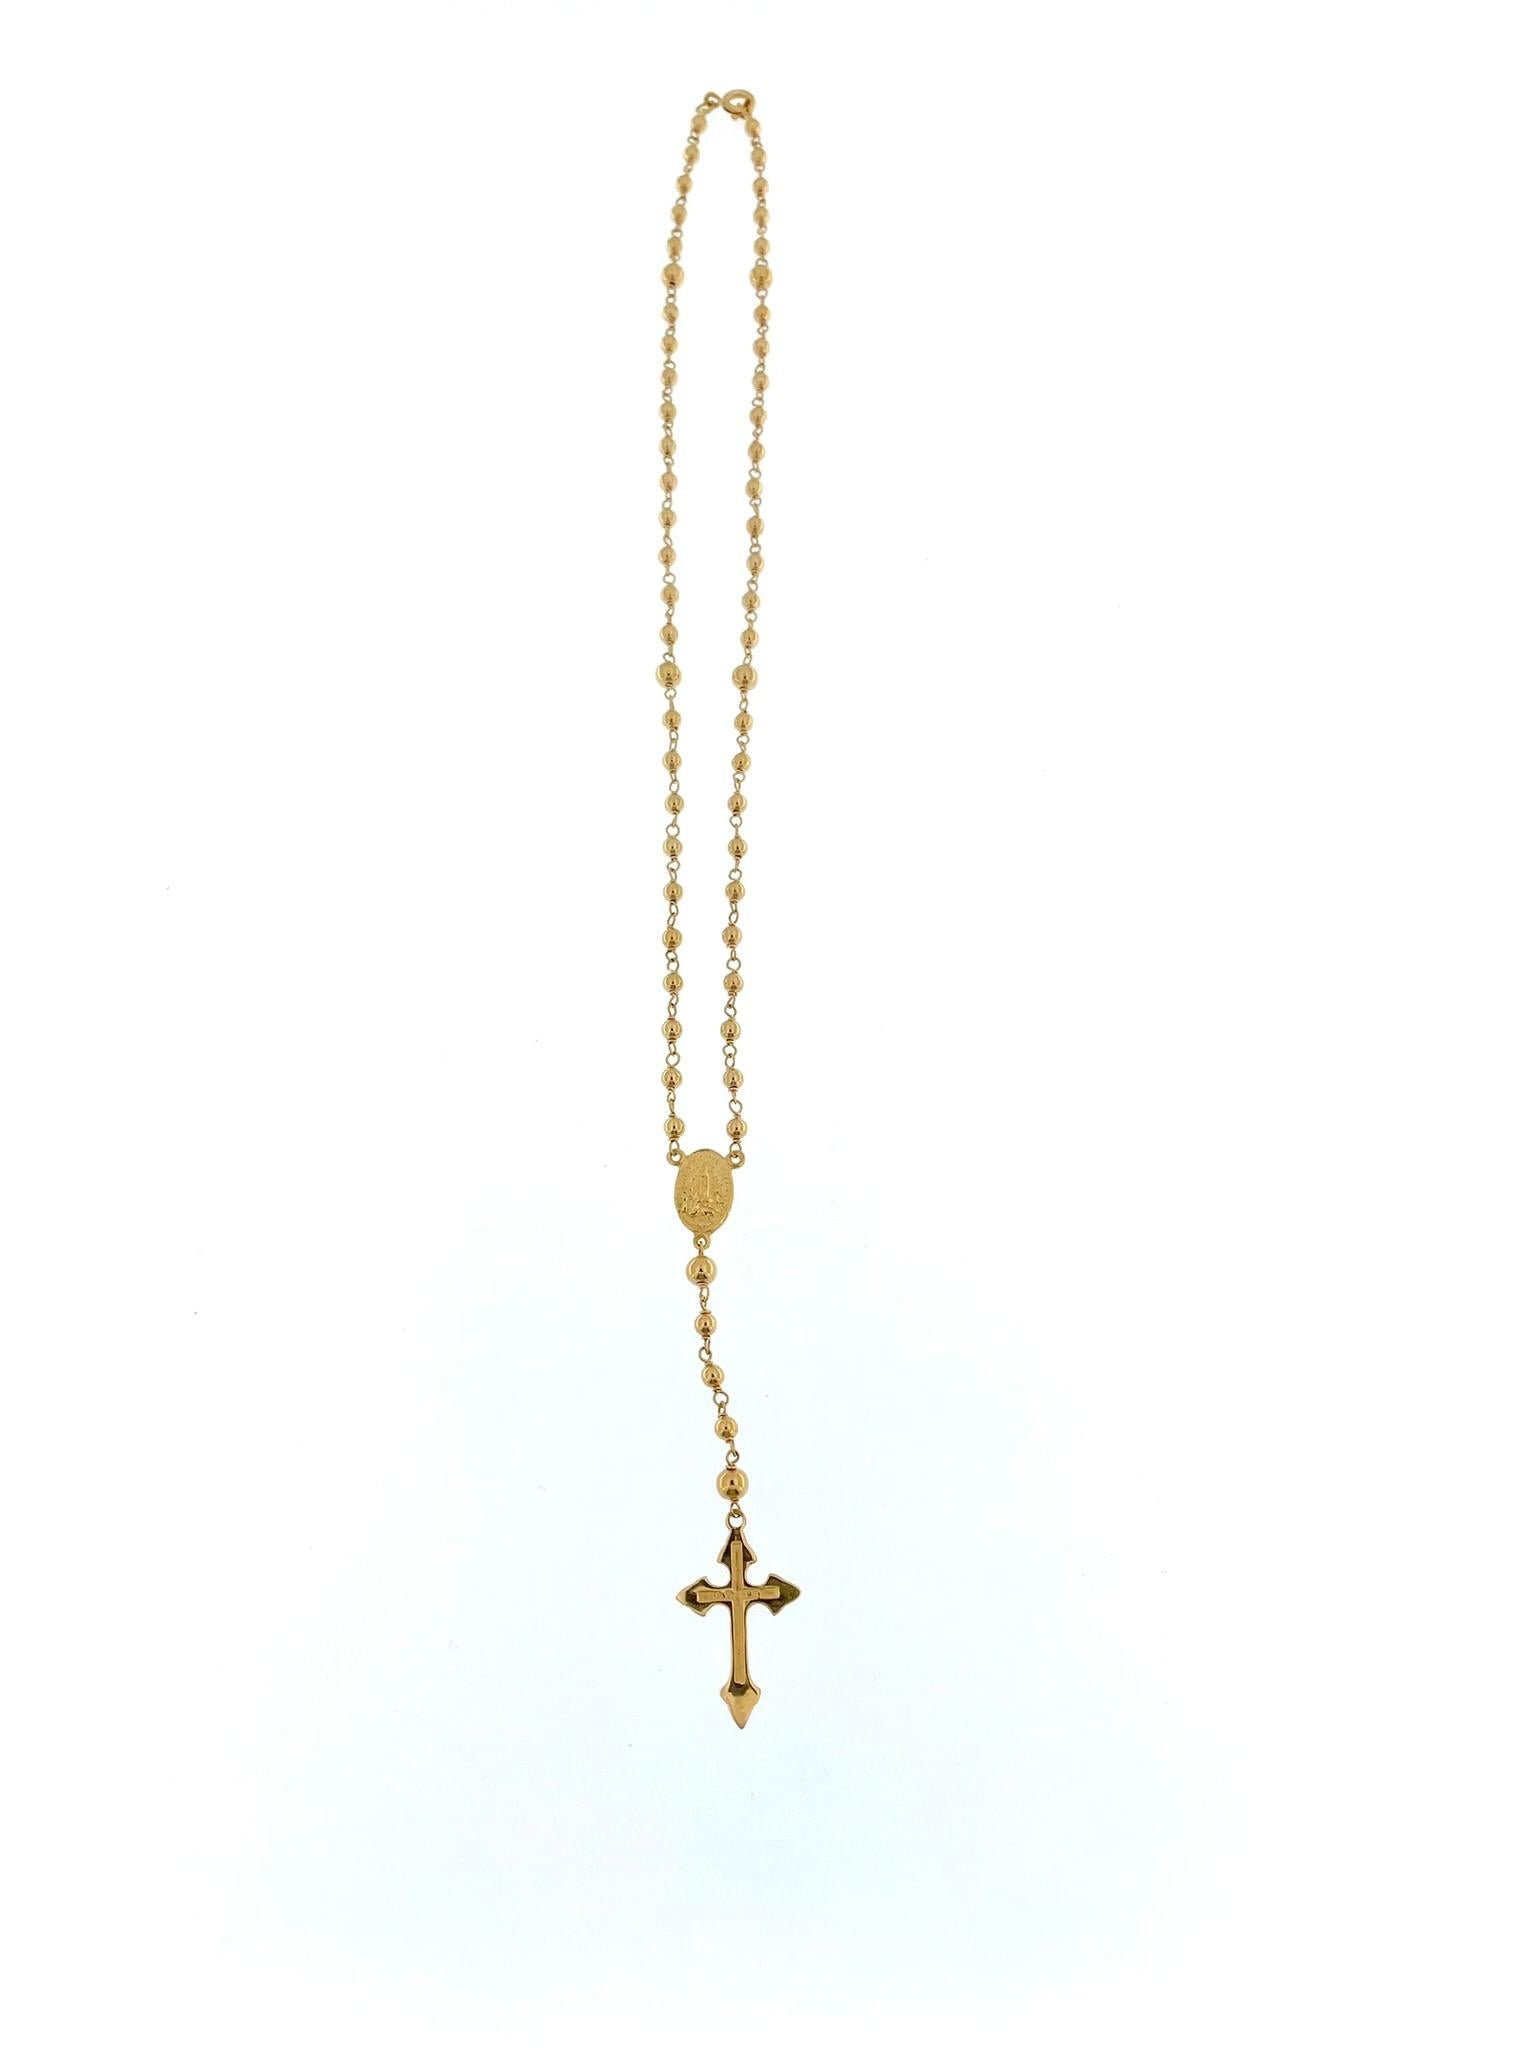 Artisan Vintage Portuguese Rosary in 19 karat Yellow Gold from Fatima For Sale